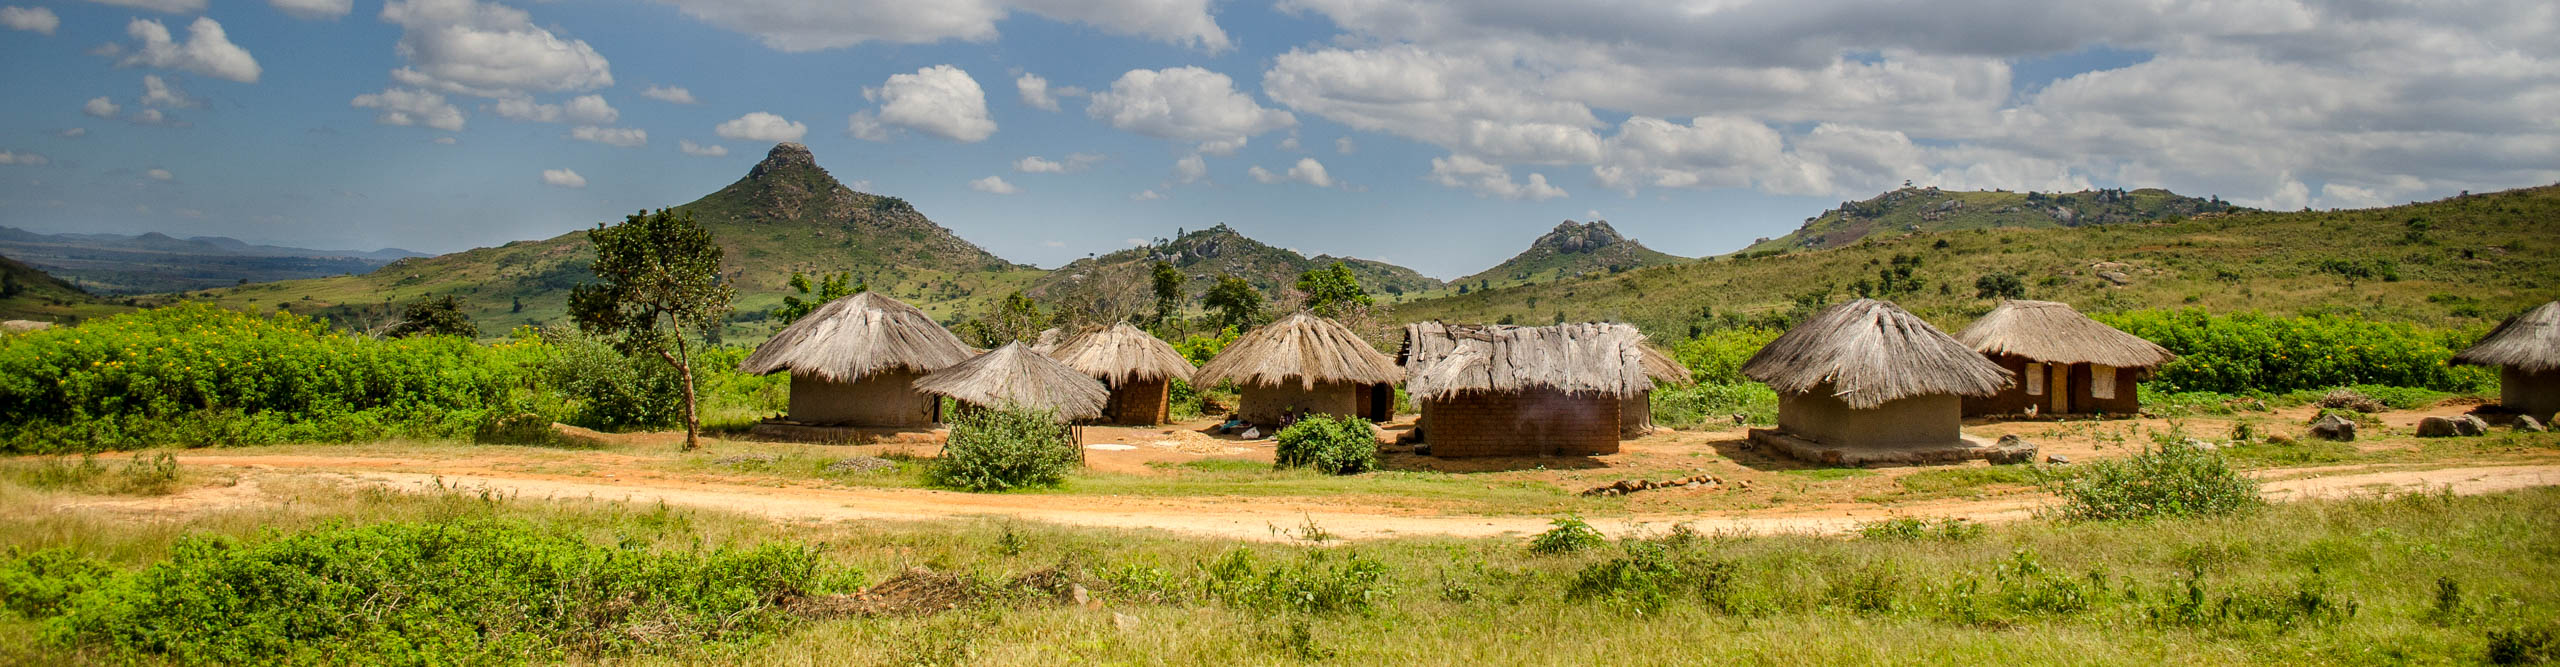 View of the landscape with villages huts of a sunny day in Malawi